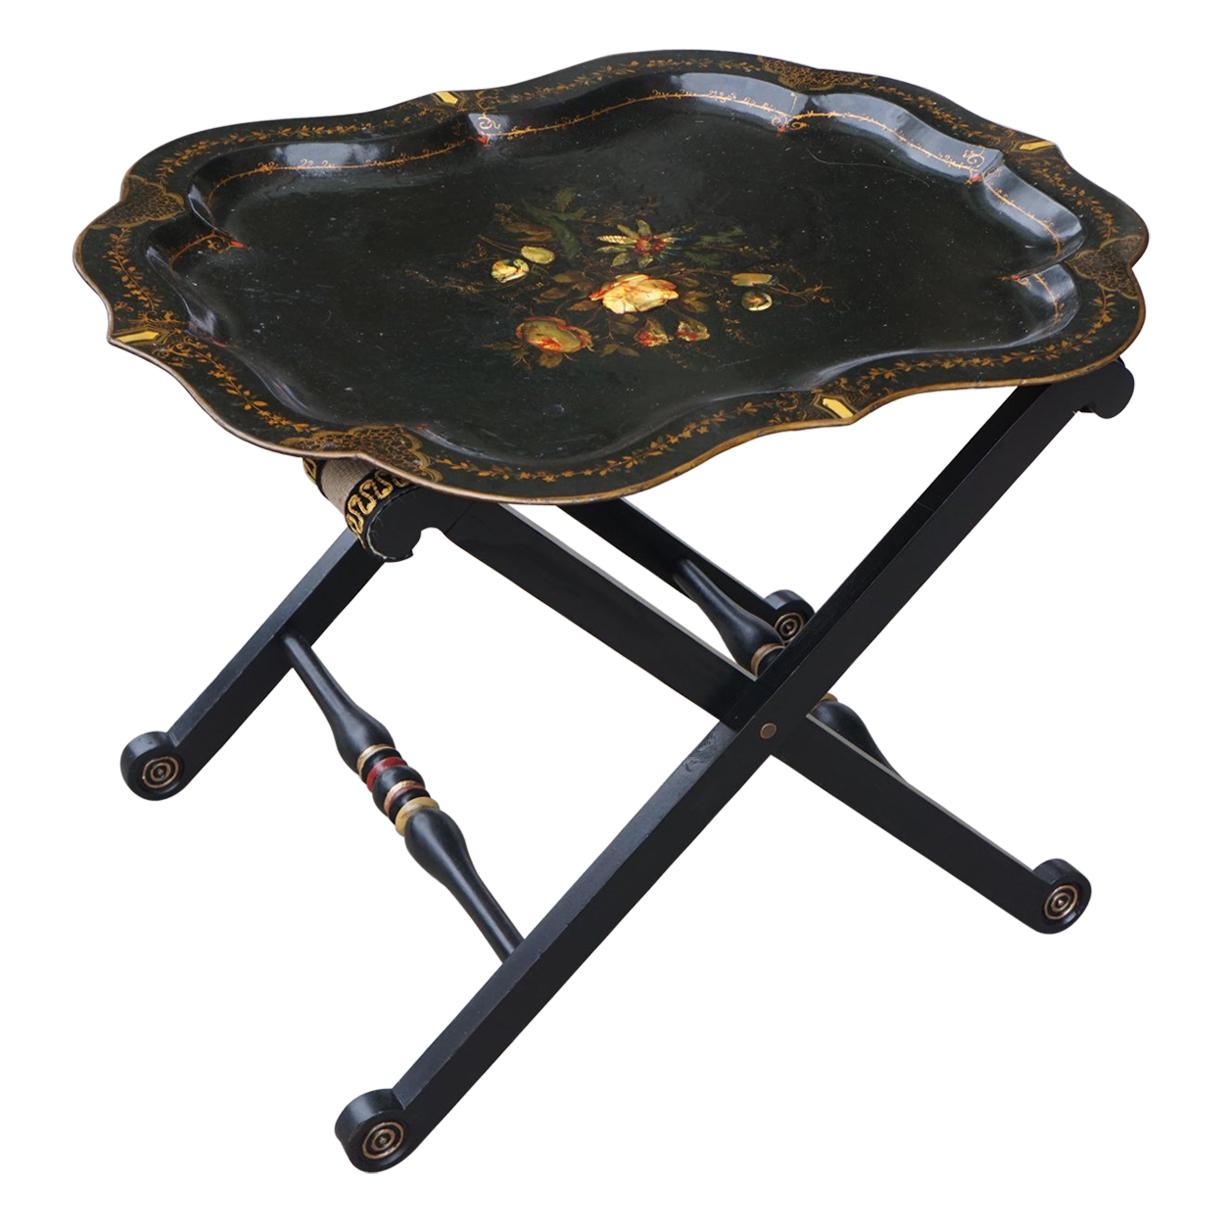 Period Victorian Pontypool Tole Tray on Later Stand